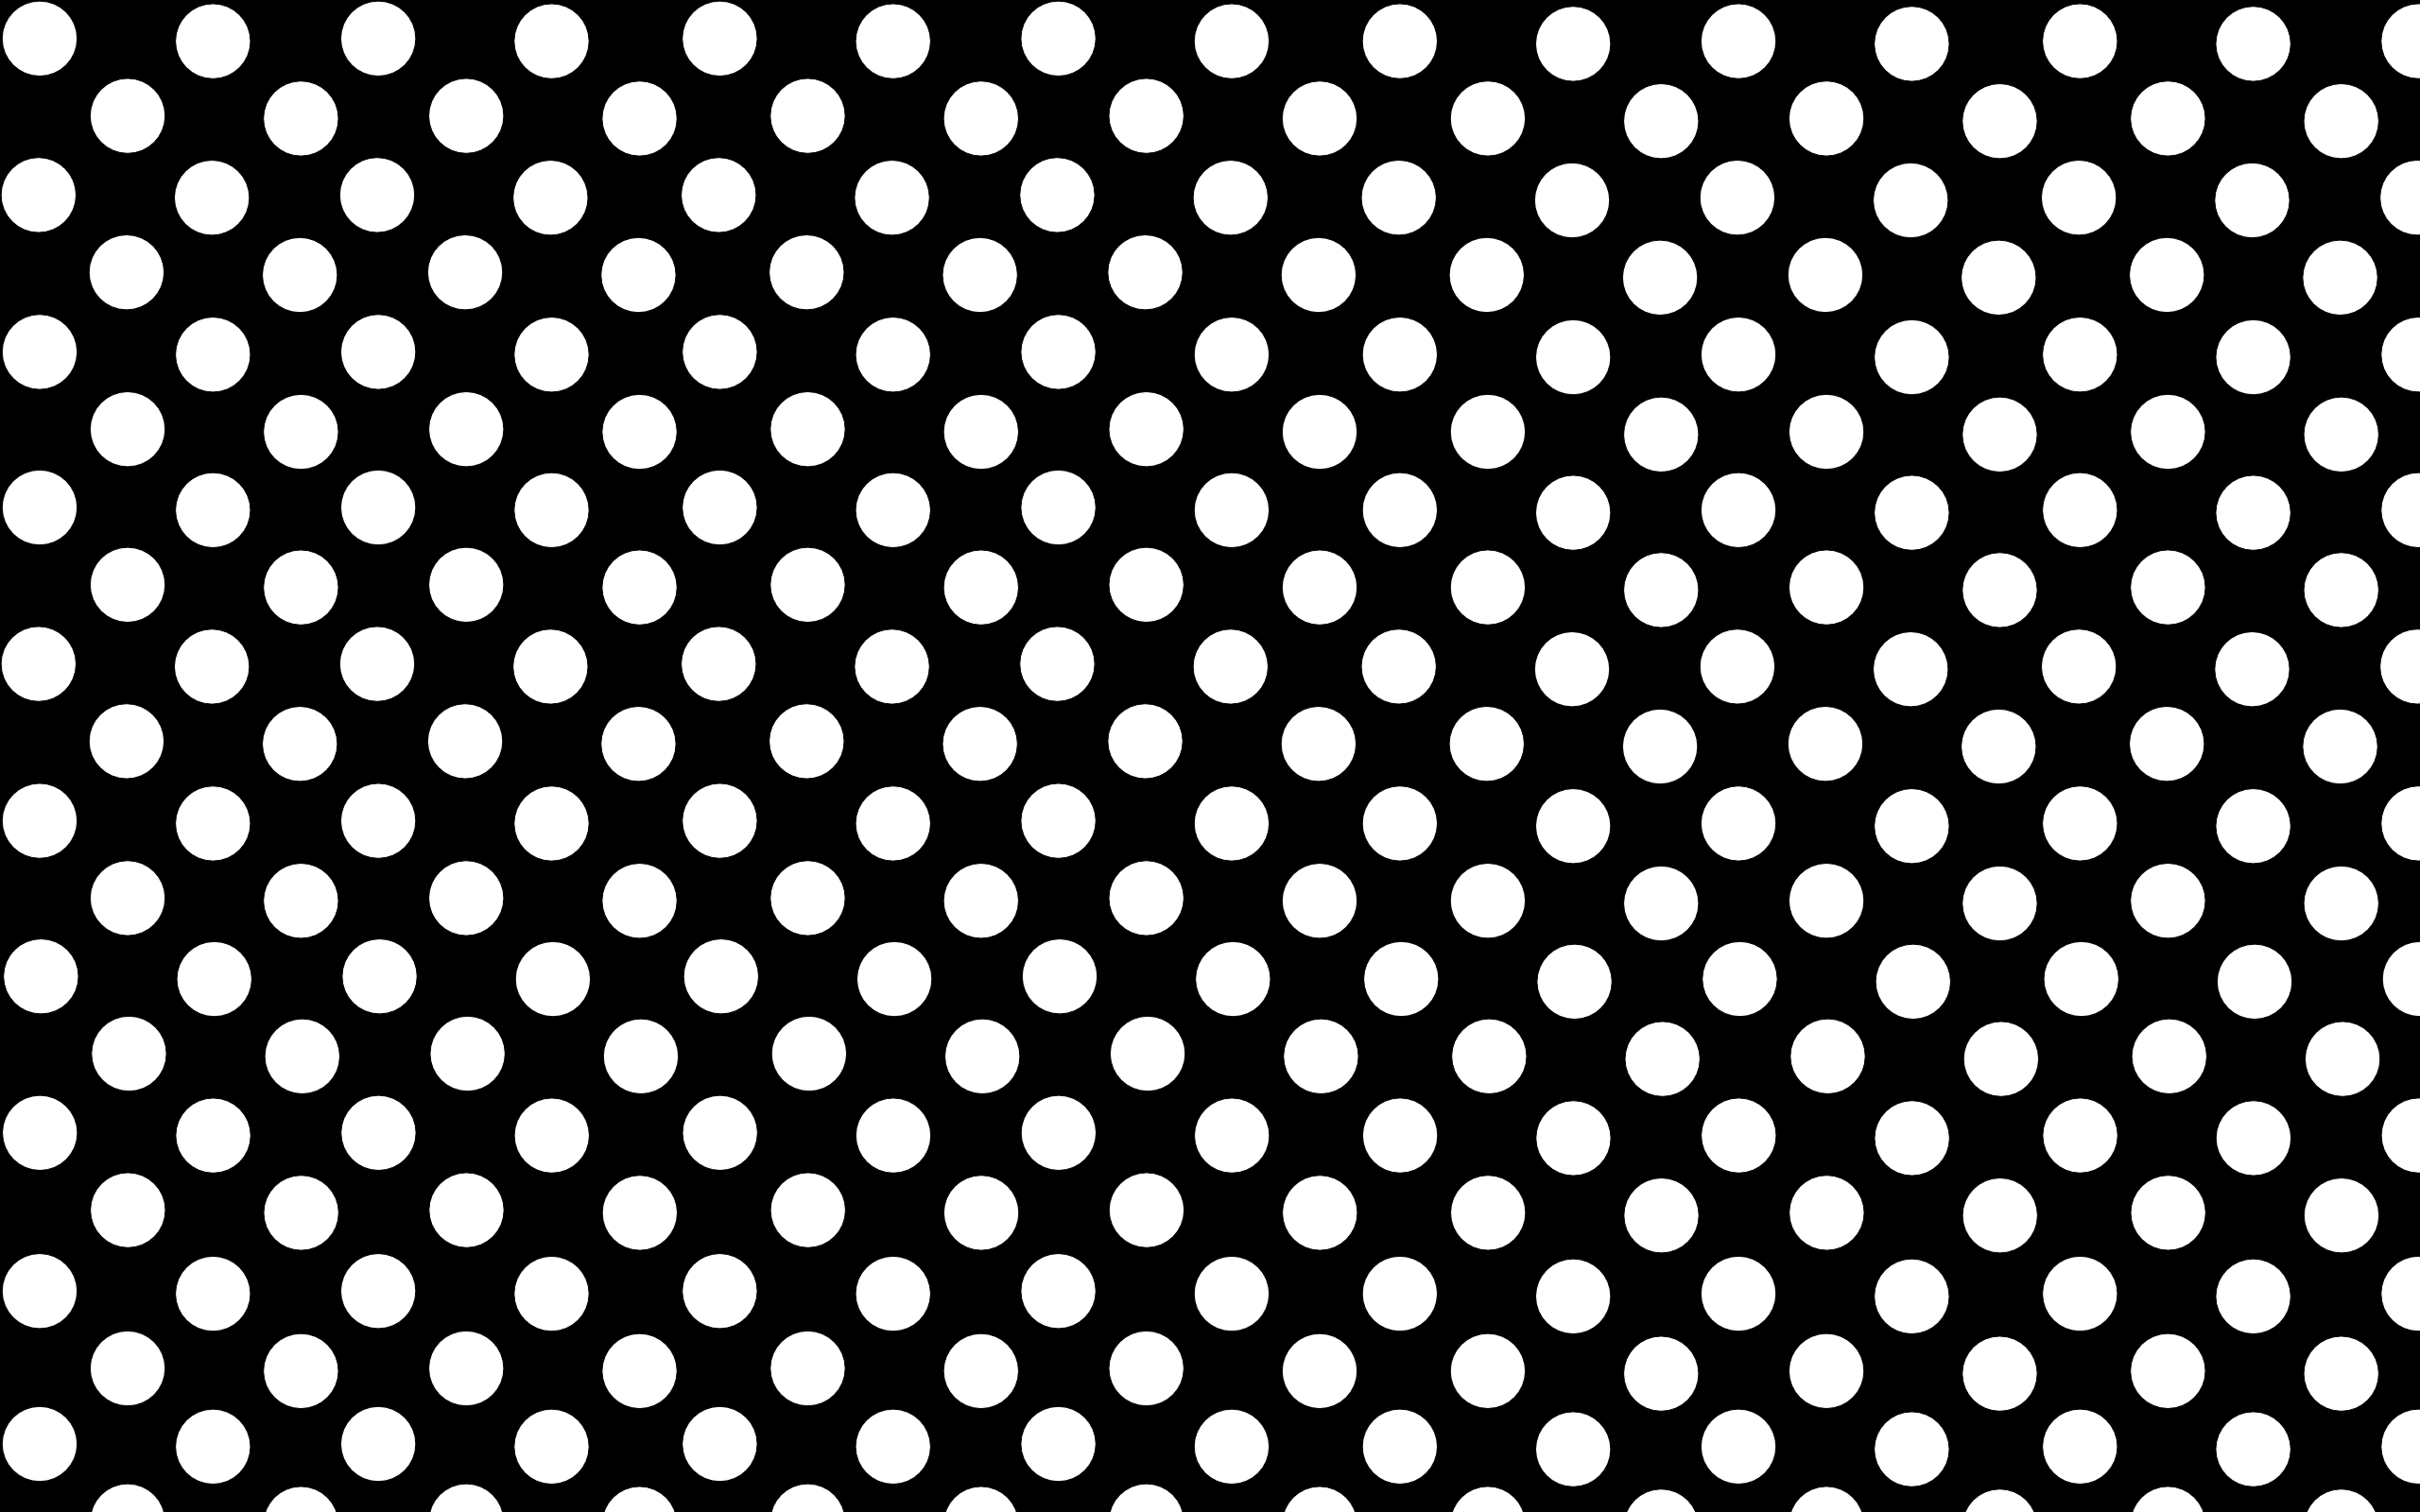 20 Cool Polka Dot Wallpapers - 3ds Max Dots Texture , HD Wallpaper & Backgrounds